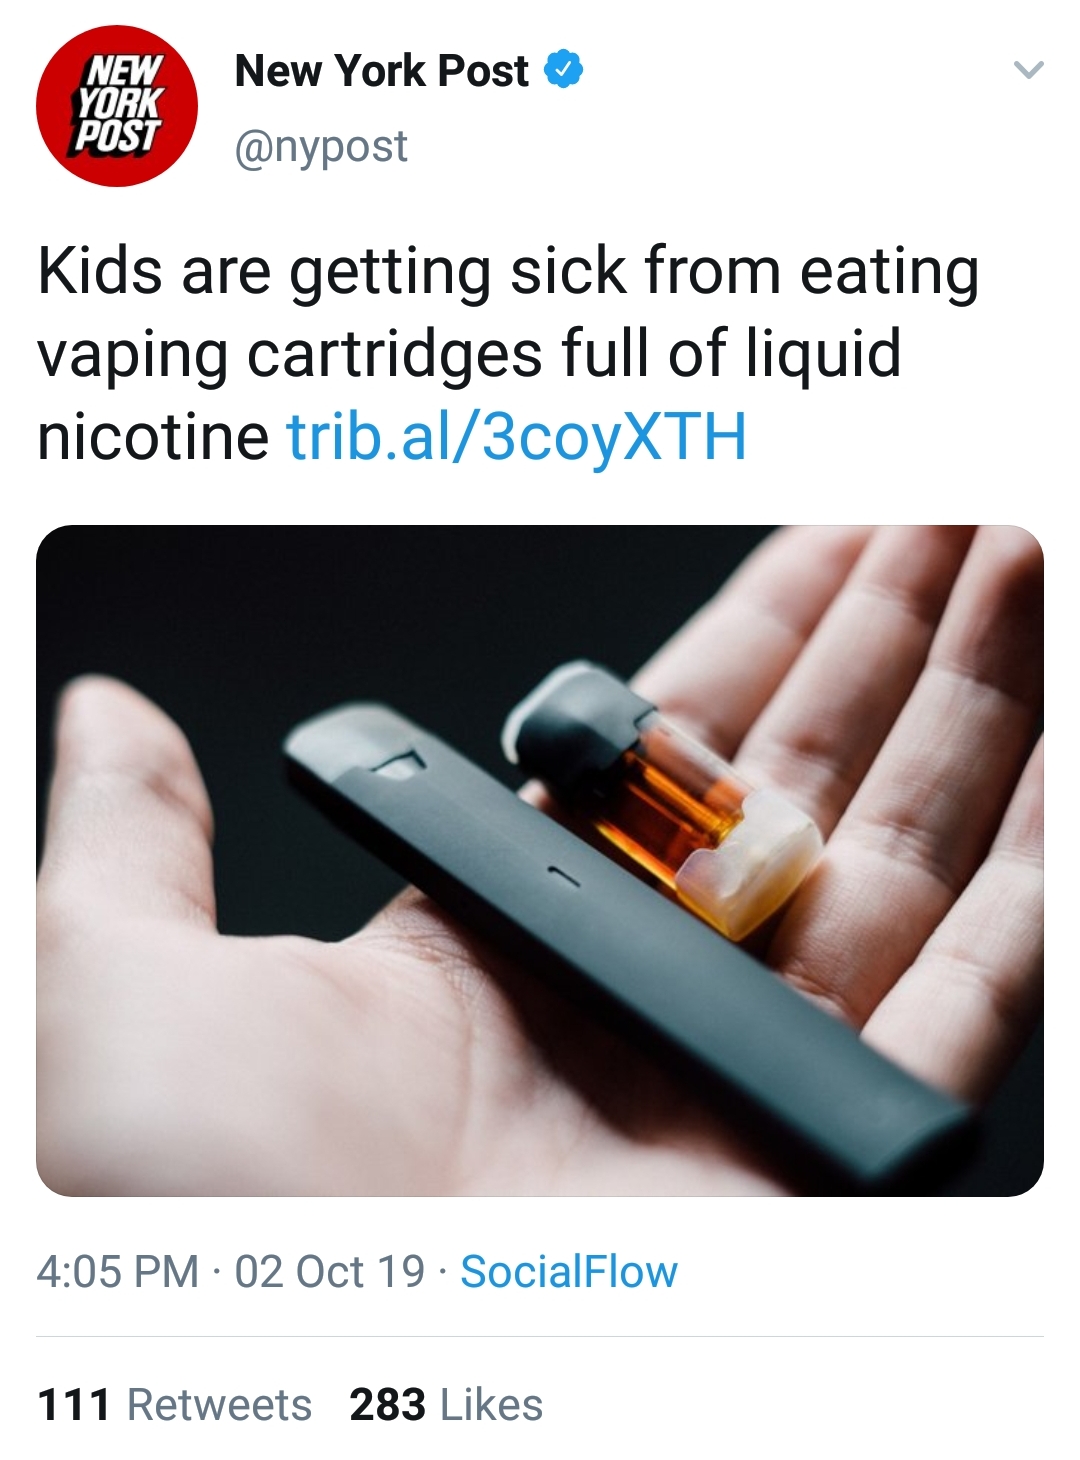 new york post - New New York Post Kids are getting sick from eating vaping cartridges full of liquid nicotine trib.al3coyXTH 02 Oct 19. SocialFlow 111 283